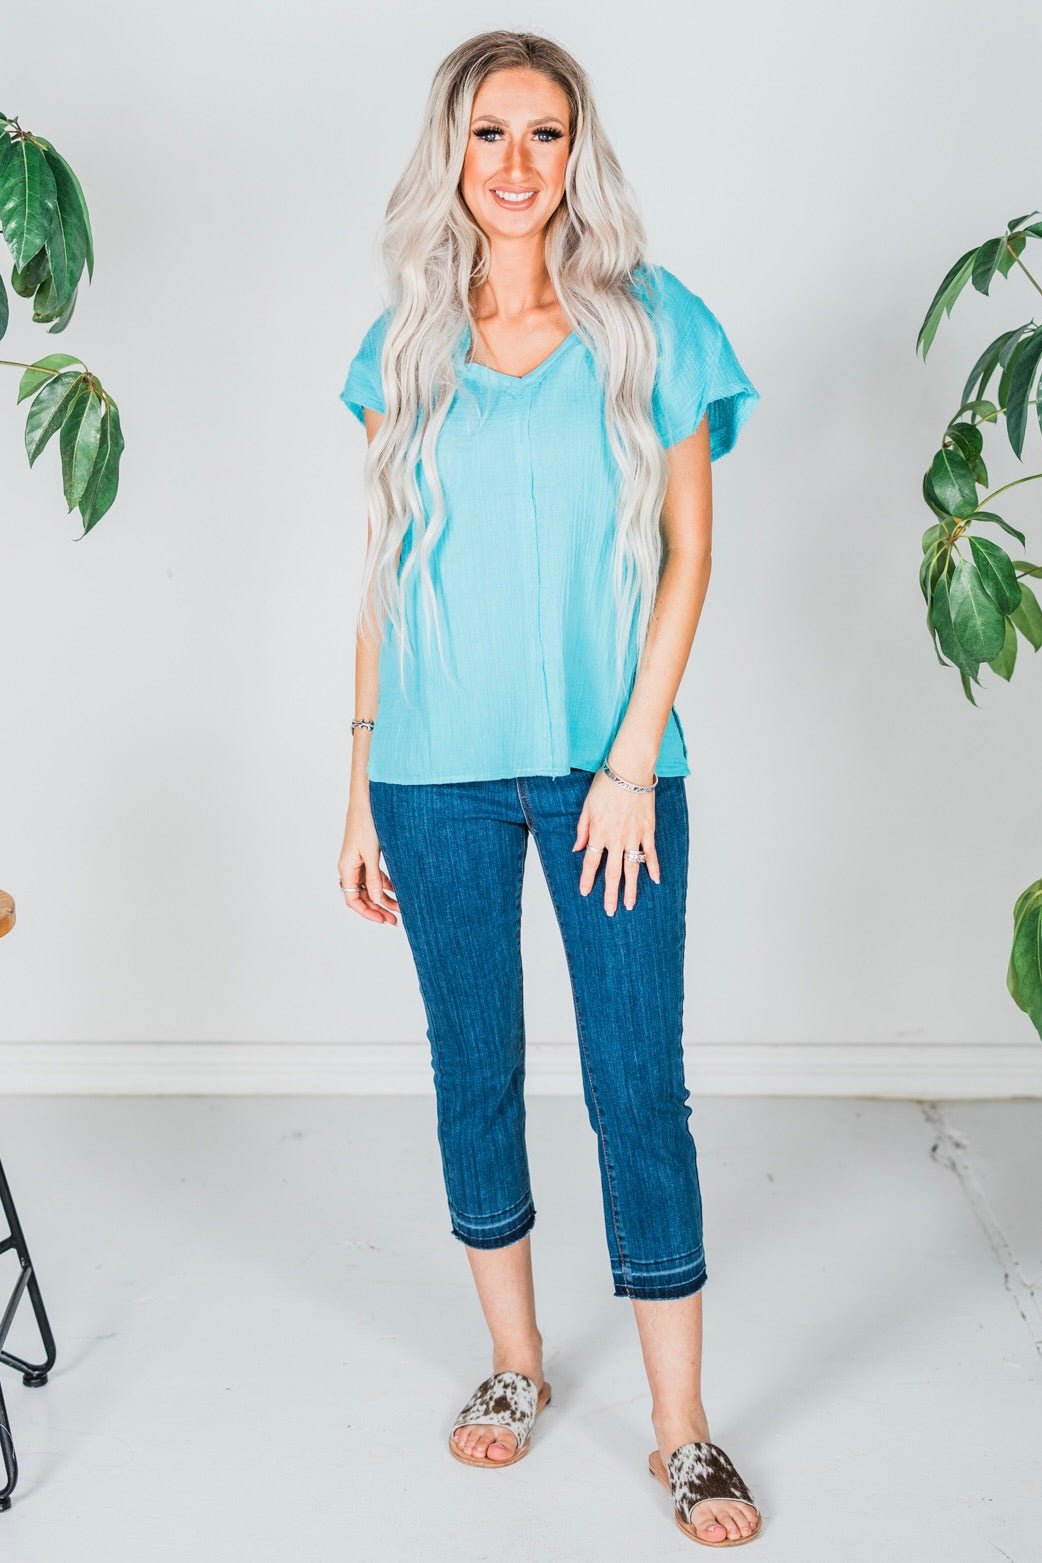 Blue Radiance Cotton Gauze Top with Raw Edge Detailing - Whiskey Skies - ANDREE BY UNIT